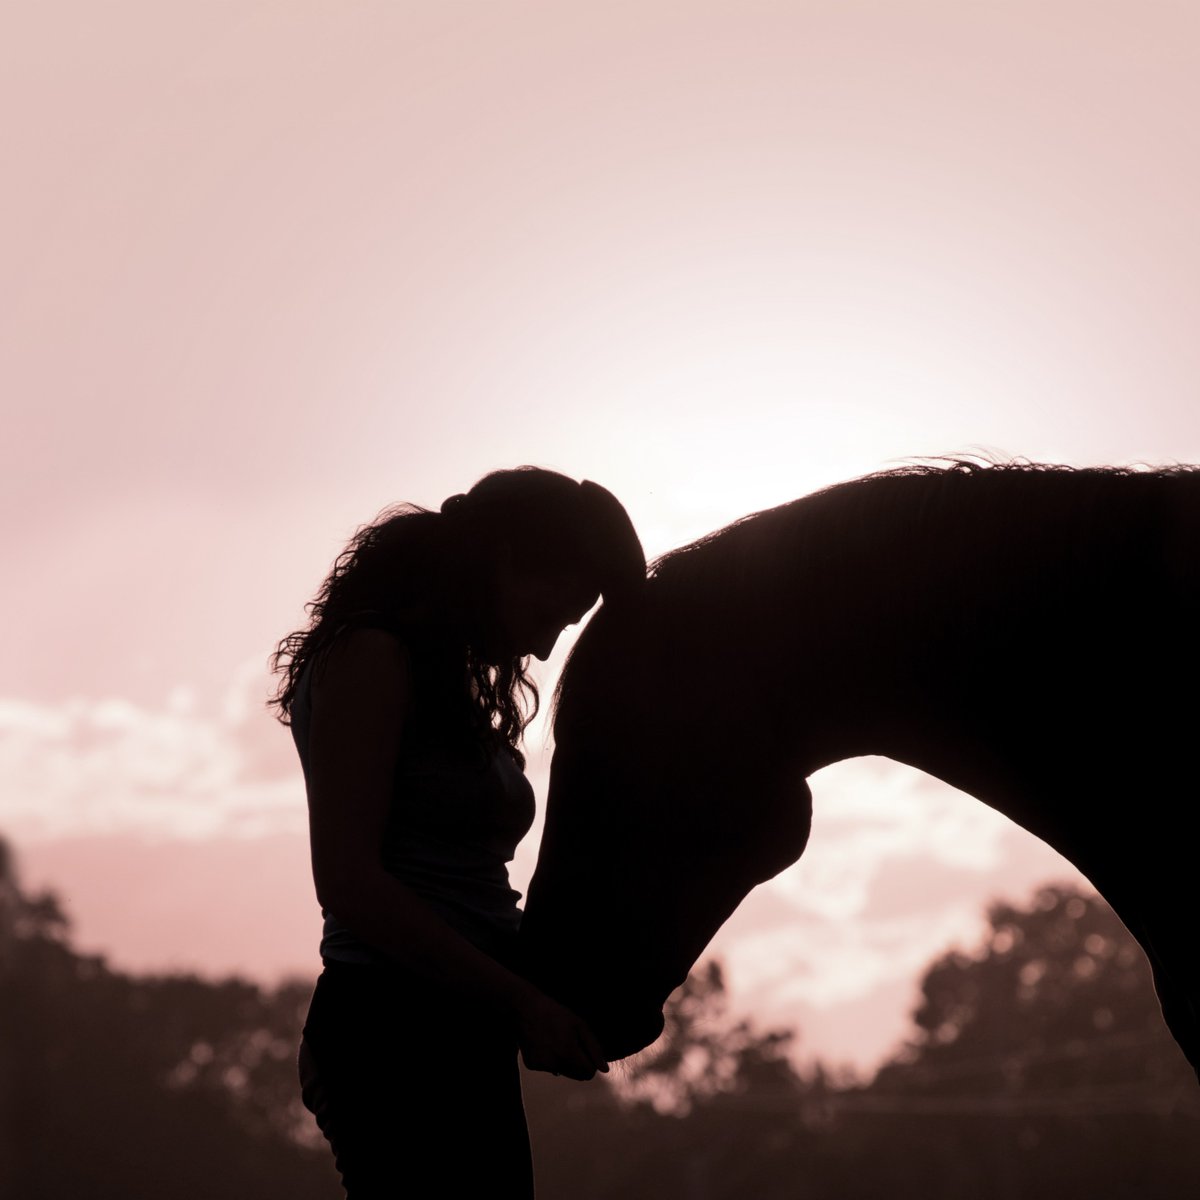 Today is National Pet Day! Let’s celebrate the special bond of people and horses enjoying life together 💞 Show your love by sharing a photo with your horse using #horsehumanbond 🐴📷 Tag three of your friends to do the same 🙏 #NationalPetDay